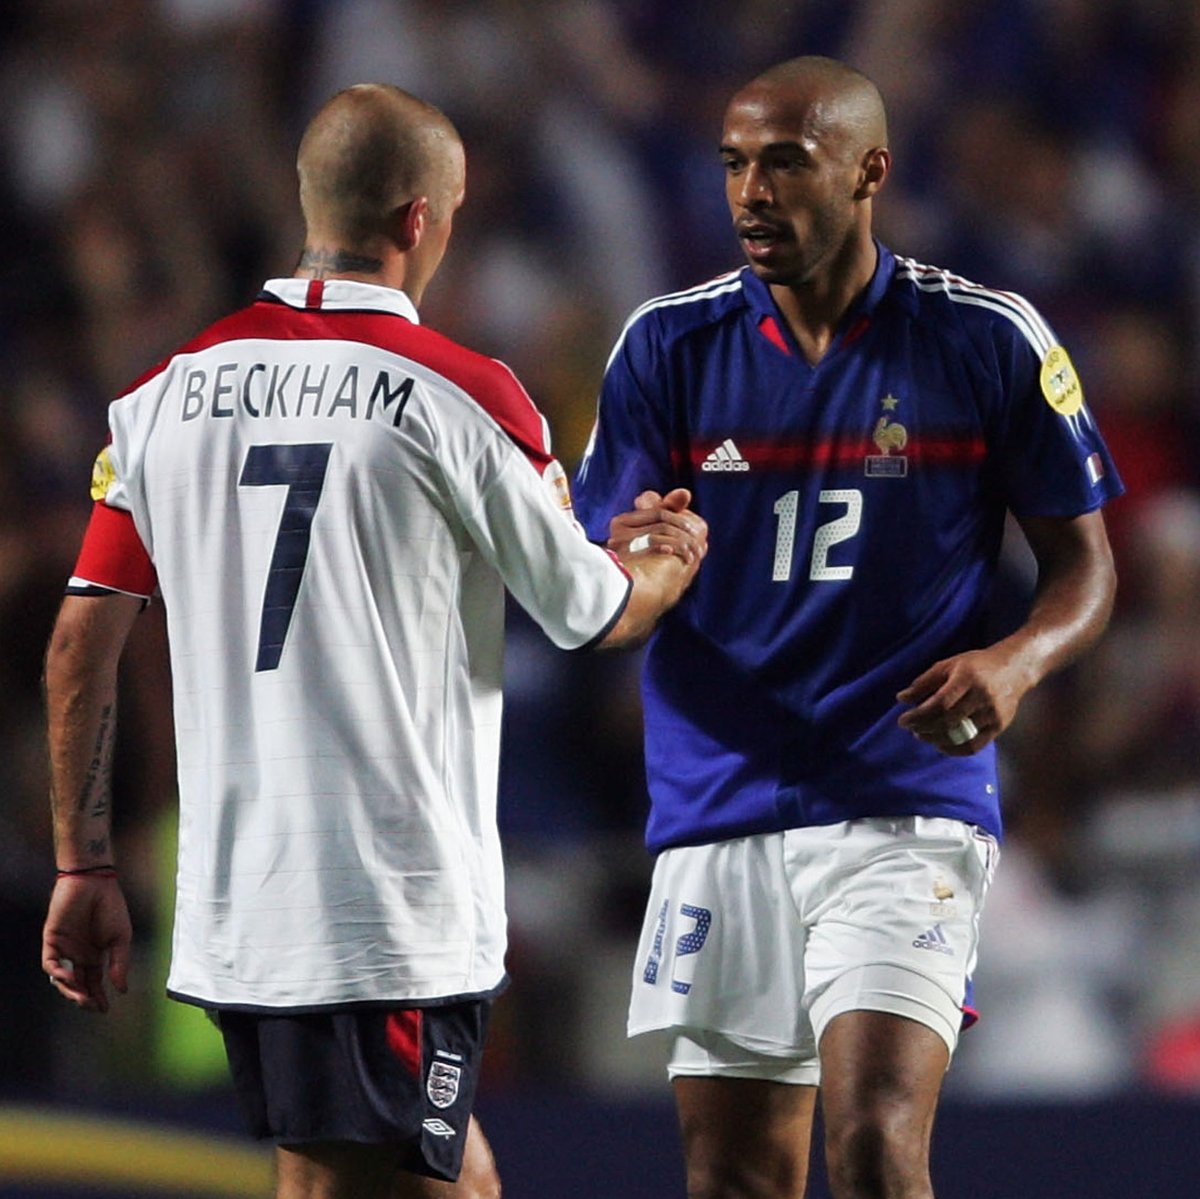 Thierry Henry gets a taste of Beckham's American lifestyle after